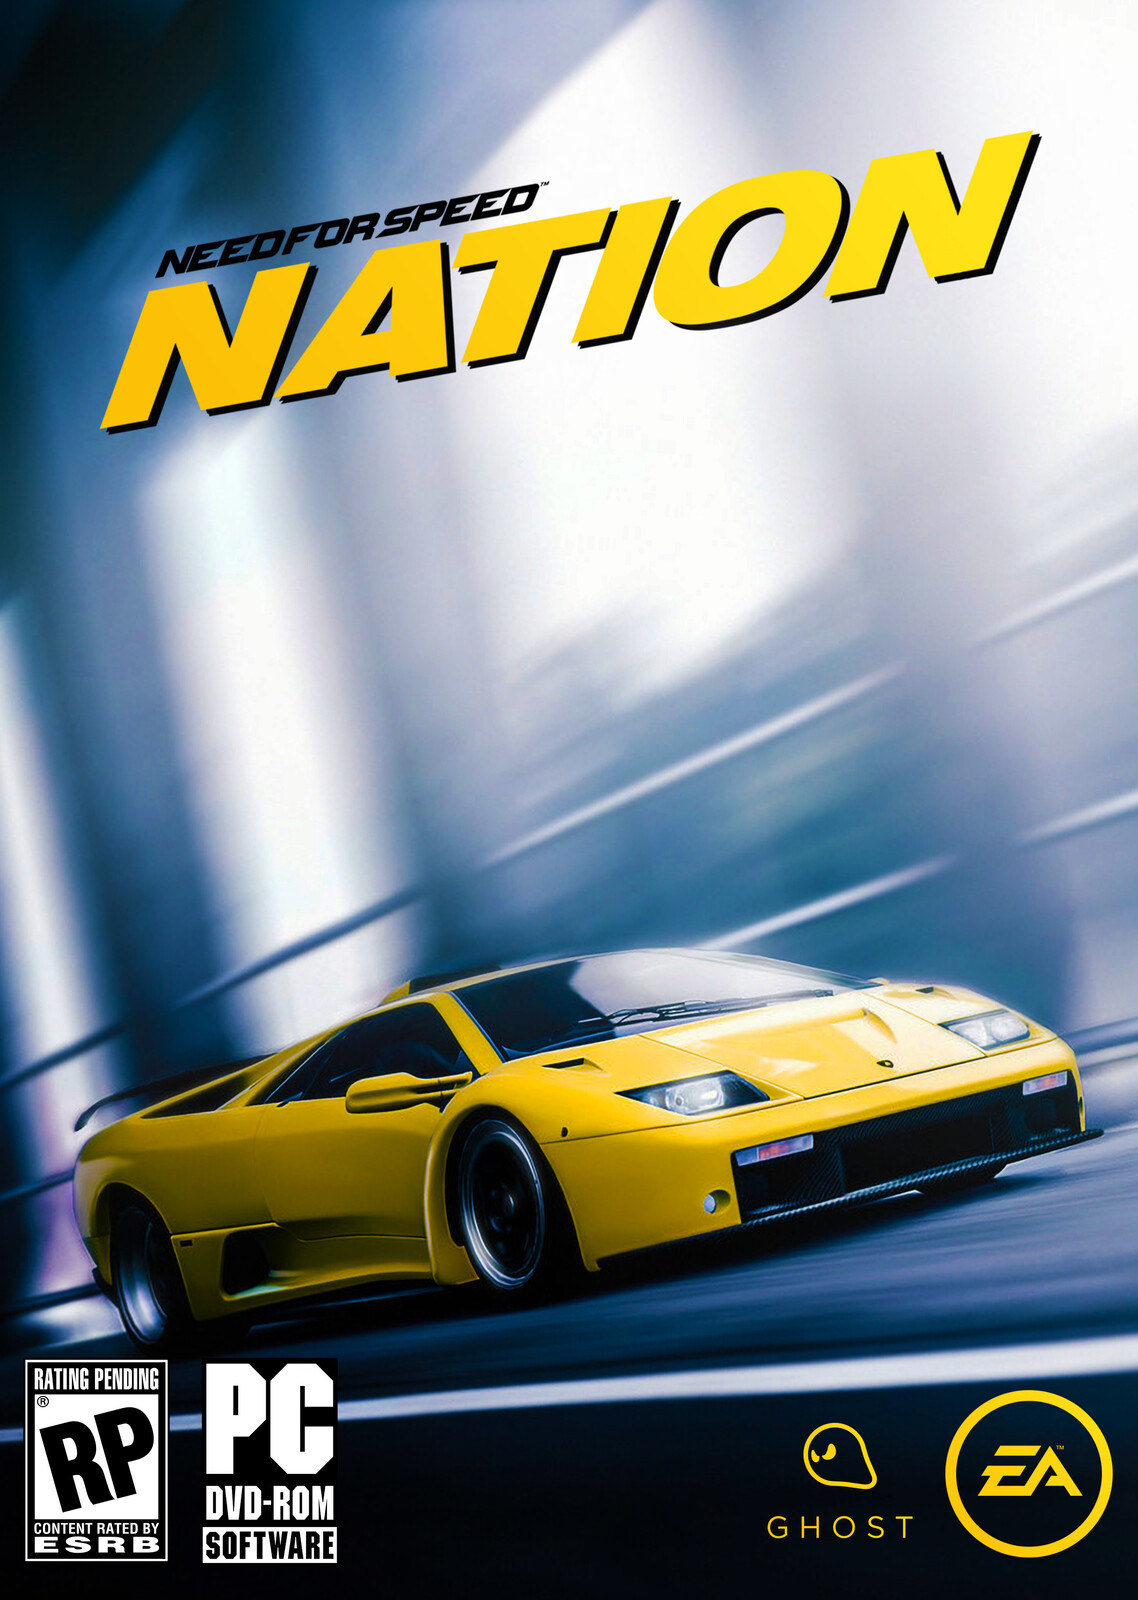 Need for Speed Nation (Cover based on Bourne15live concept, logo by agenTOUGH, original image by @NuxCreative)